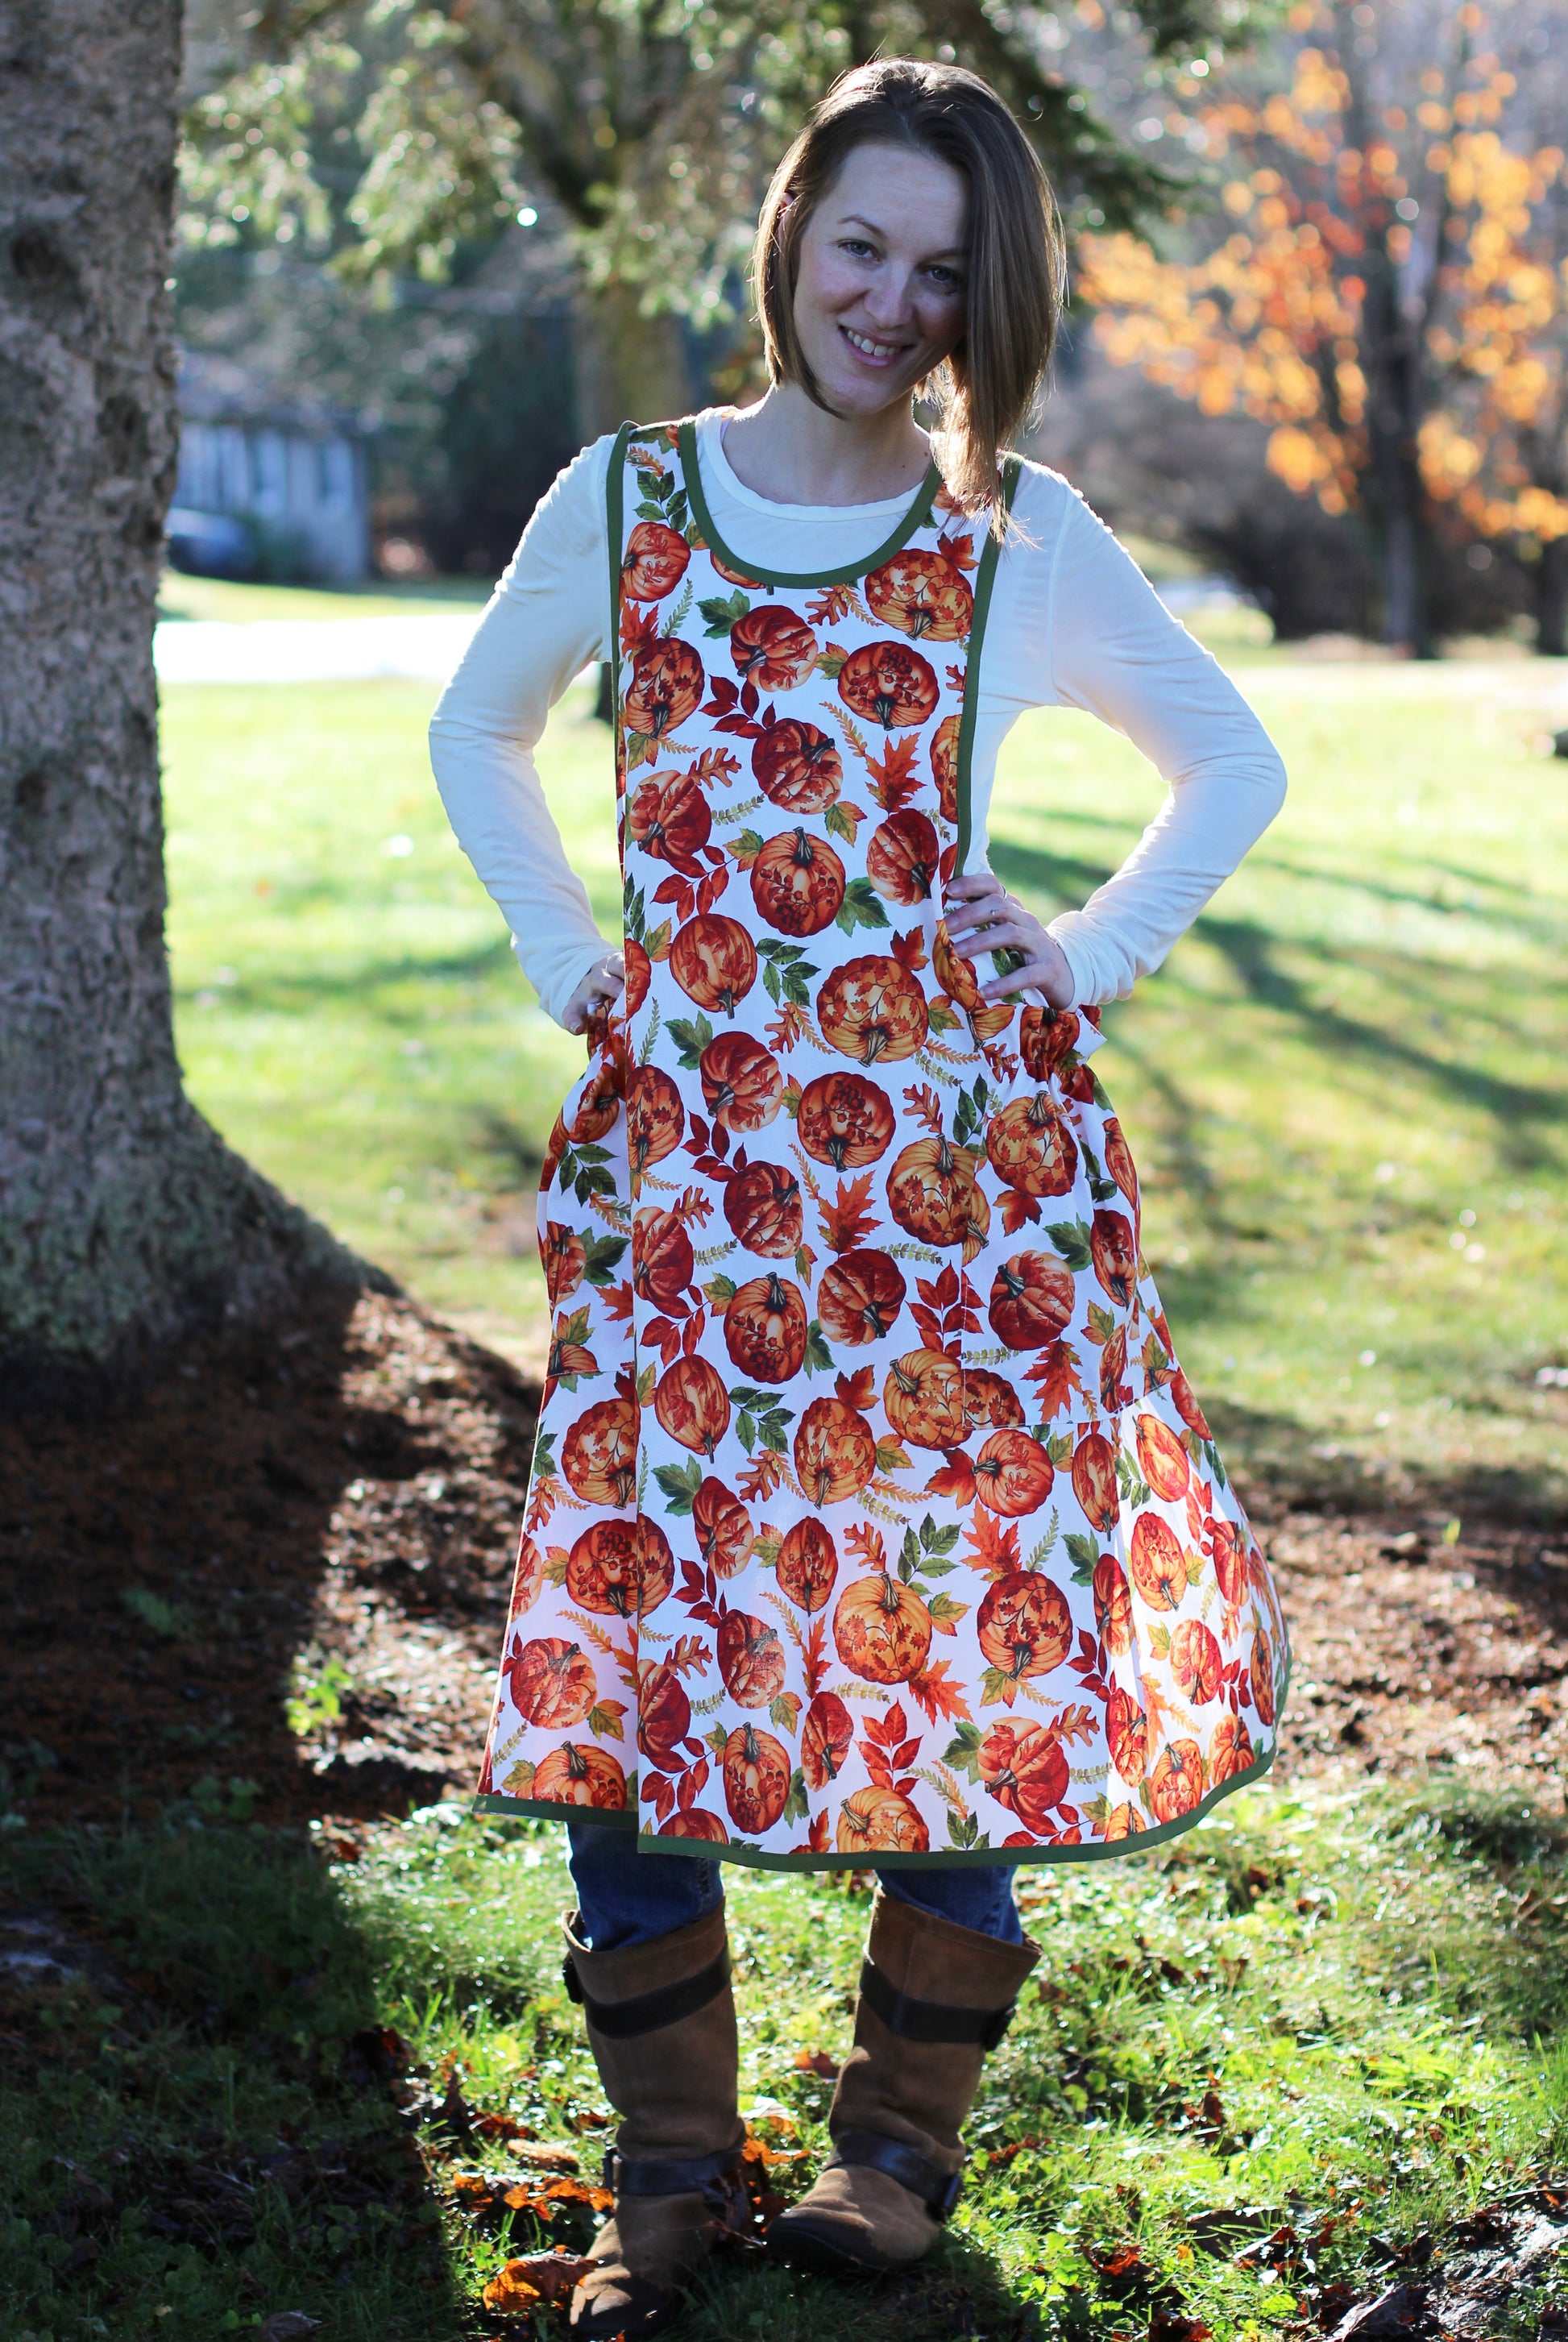 No Ties Apron in a Pumpkin Print - front View with model smiling